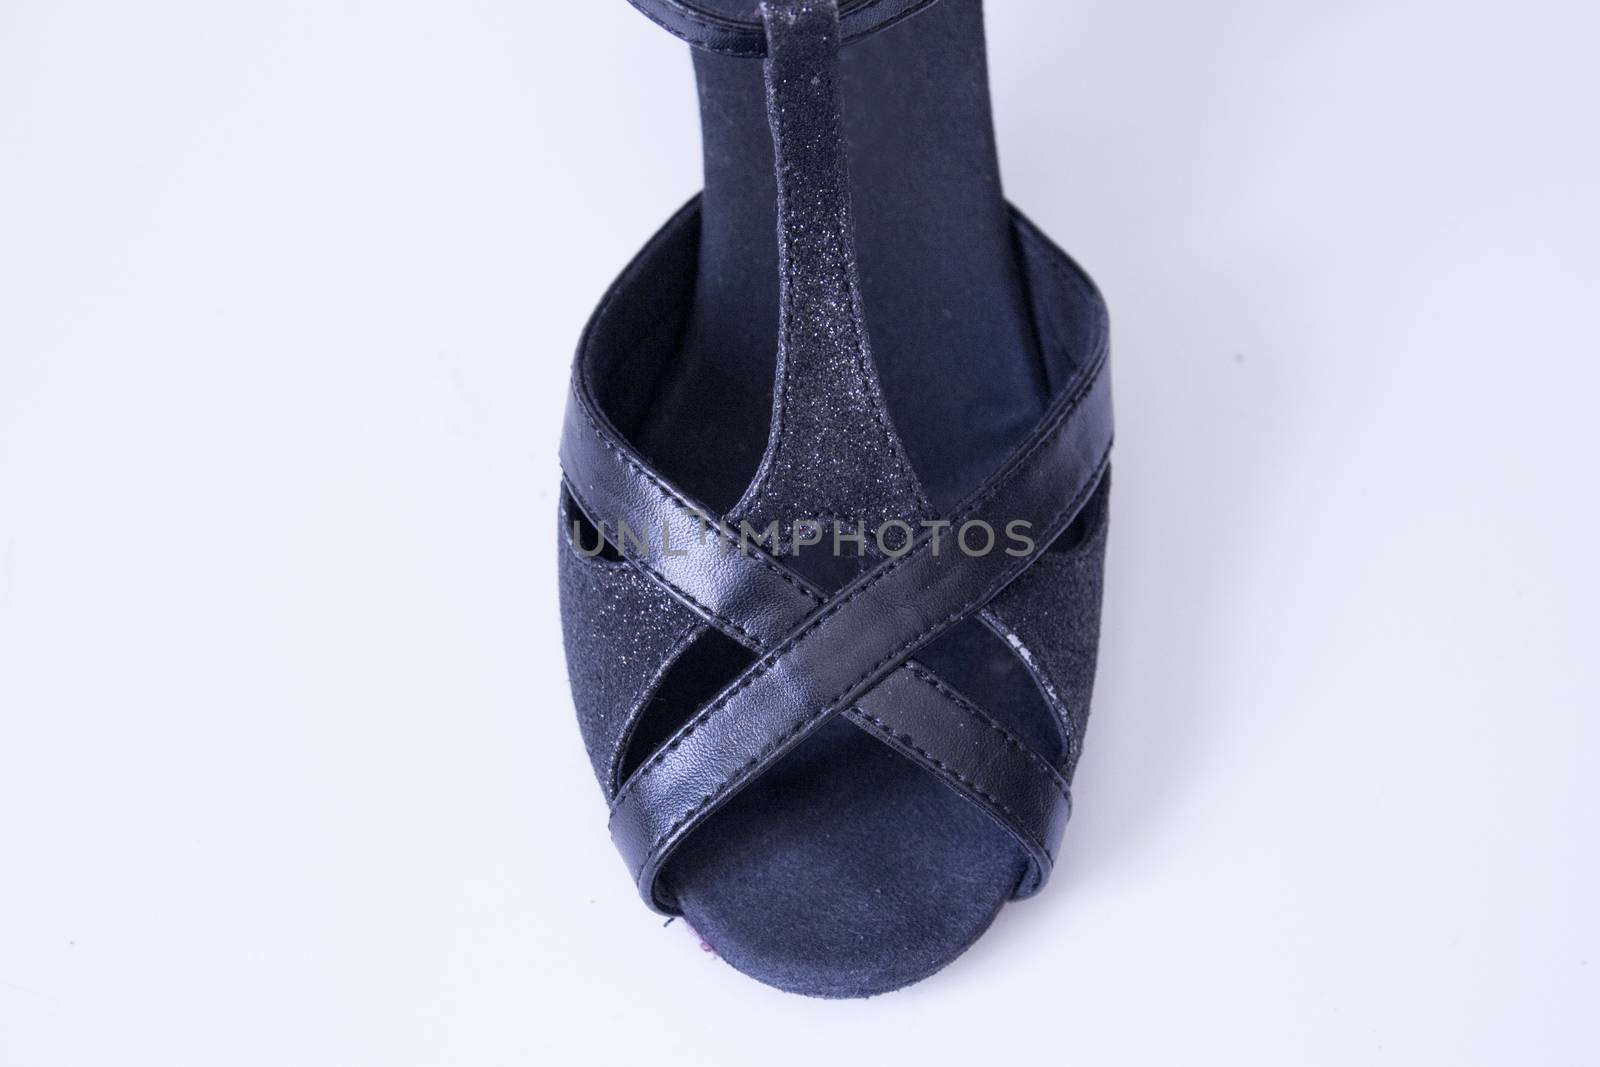 Women sandal for Latin dance seen from behind